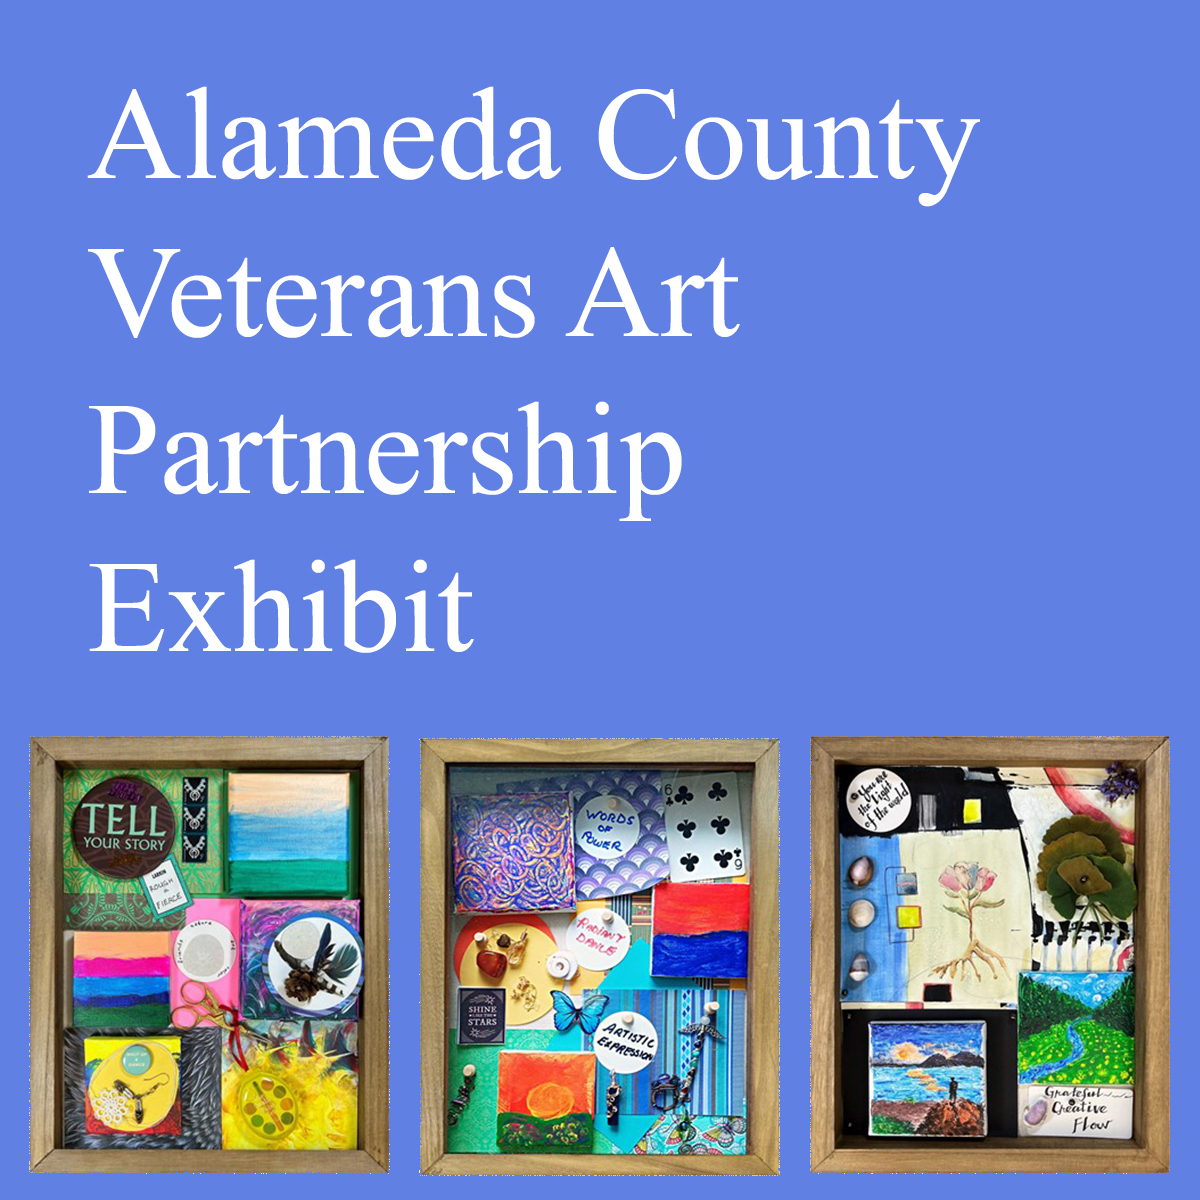 Artwork by participants in the Alameda County Veterans Art Partnership Program